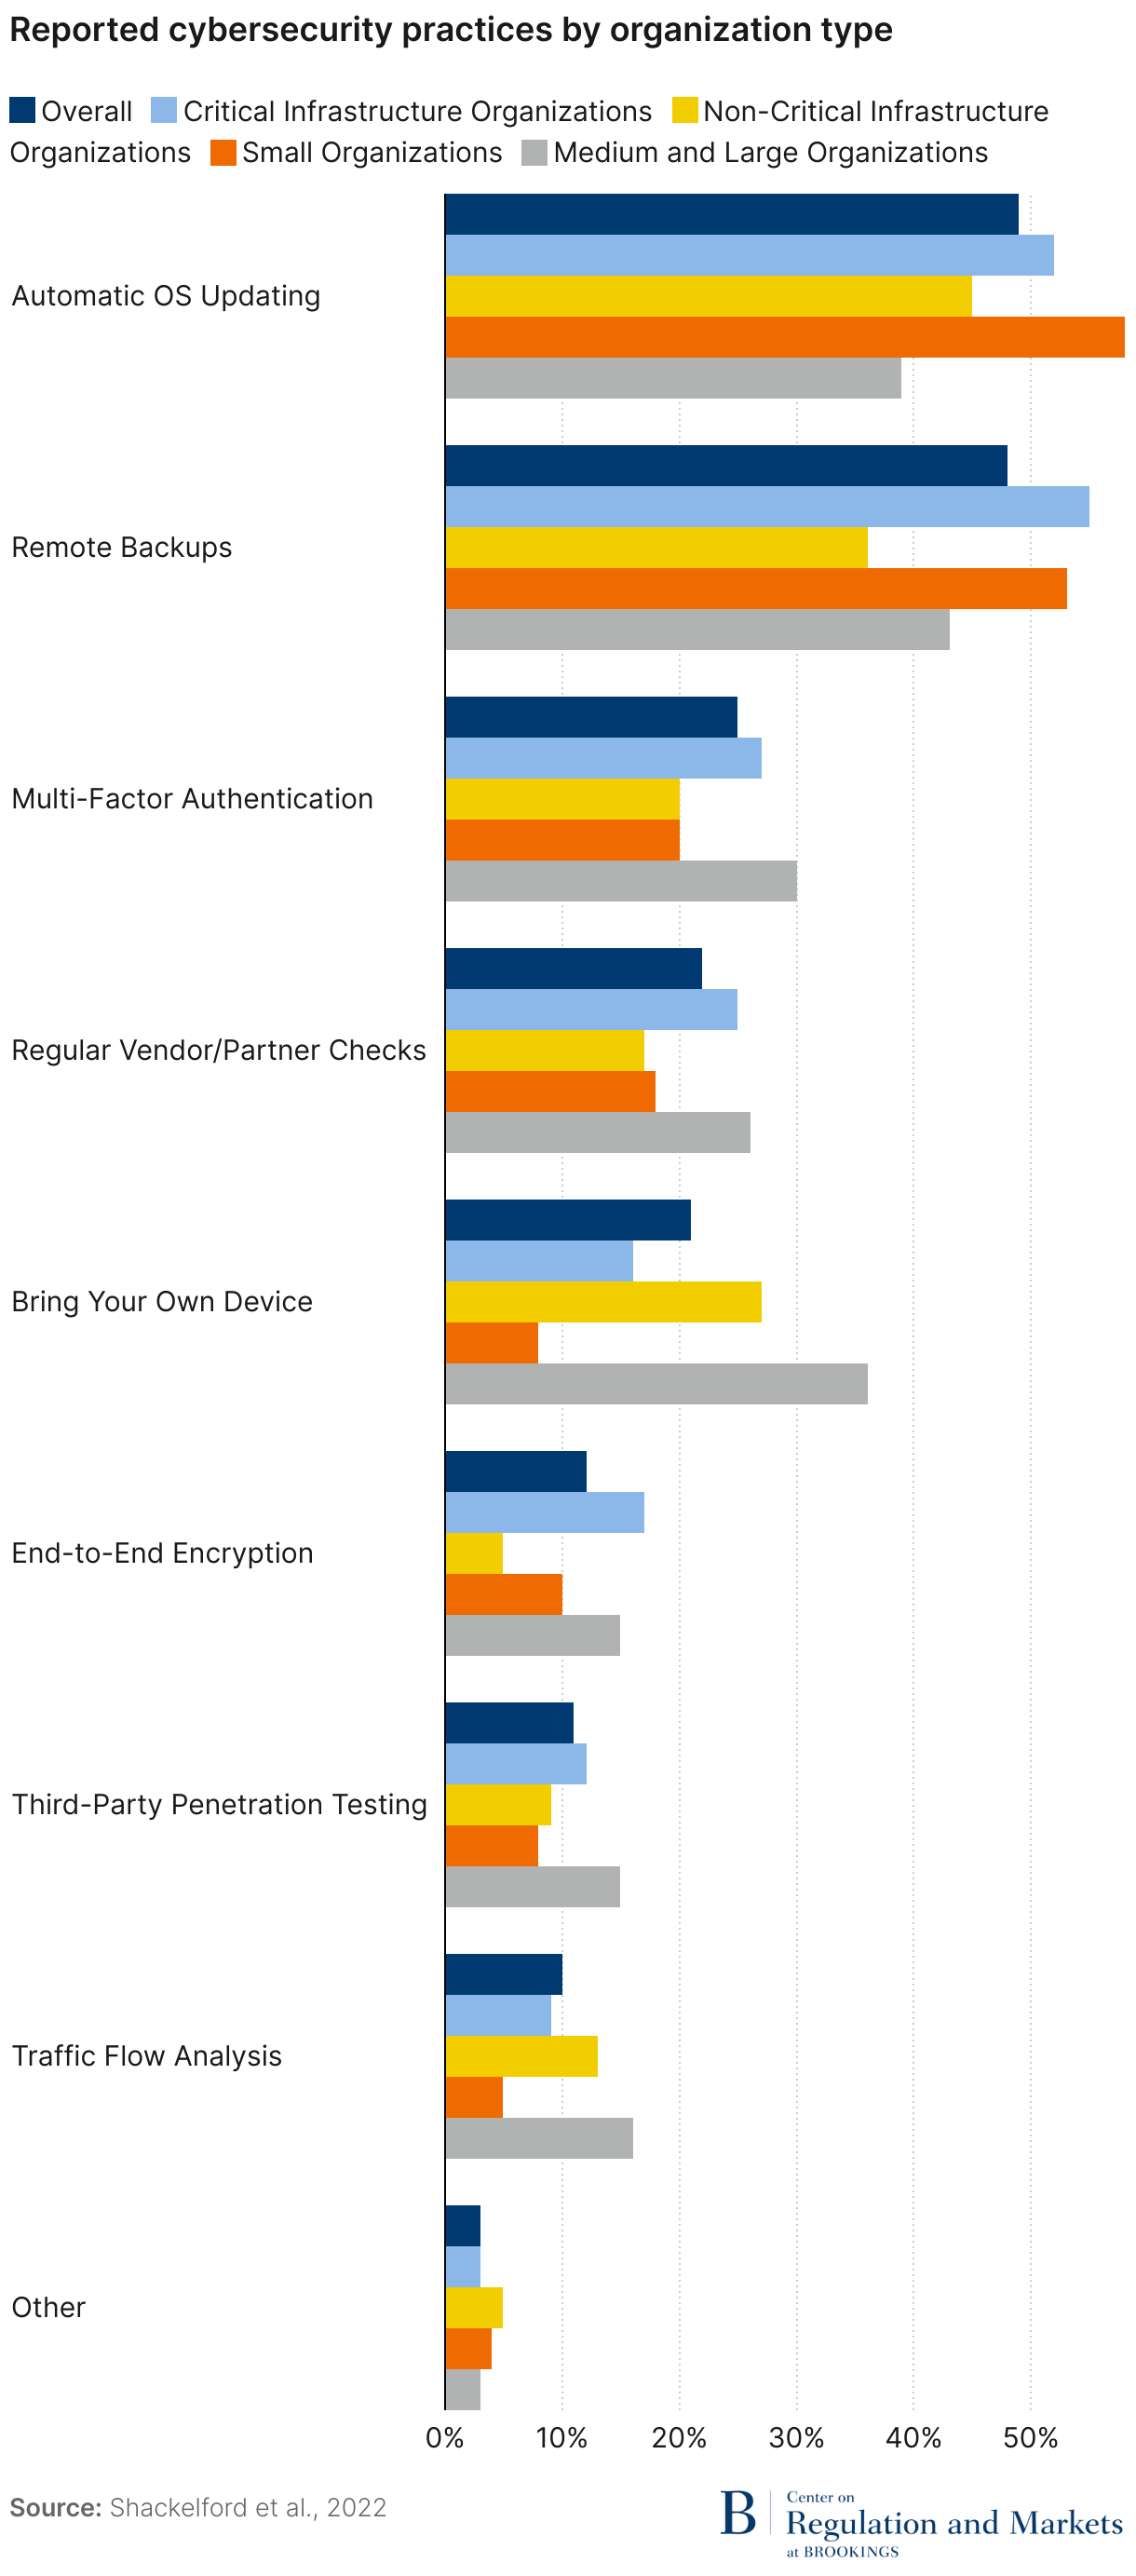 Reported cybersecurity practices by organization type